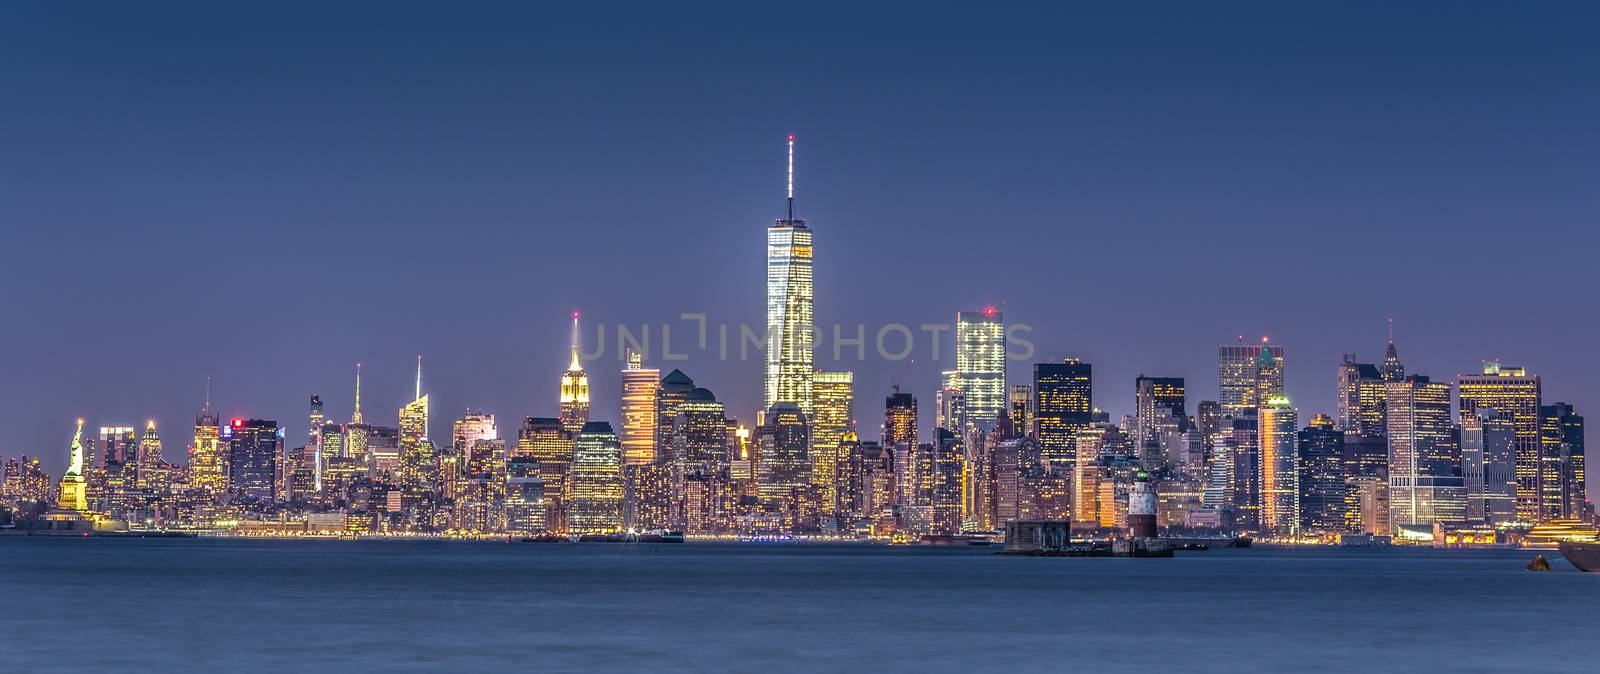 New York City Manhattan downtown skyline at dusk with skyscrapers illuminated over Hudson River panorama. Horizontal composition.